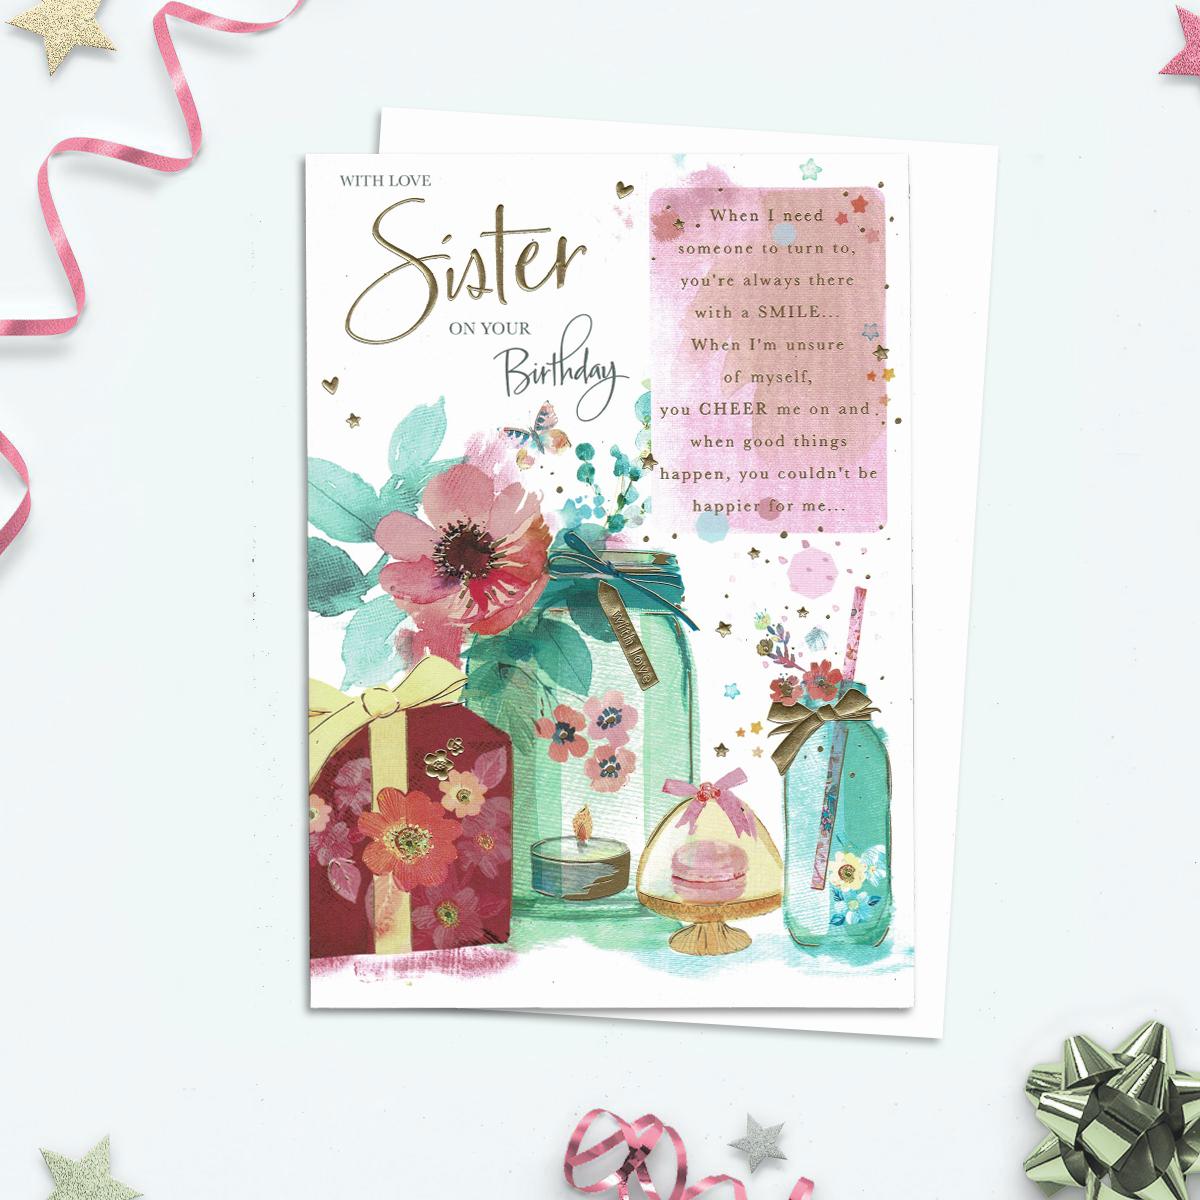 With Love Sister On Your Birthday With Verse Plus Bright Florals And Gifts. These Are Accented In Gold Foil . Complete With White Envelope